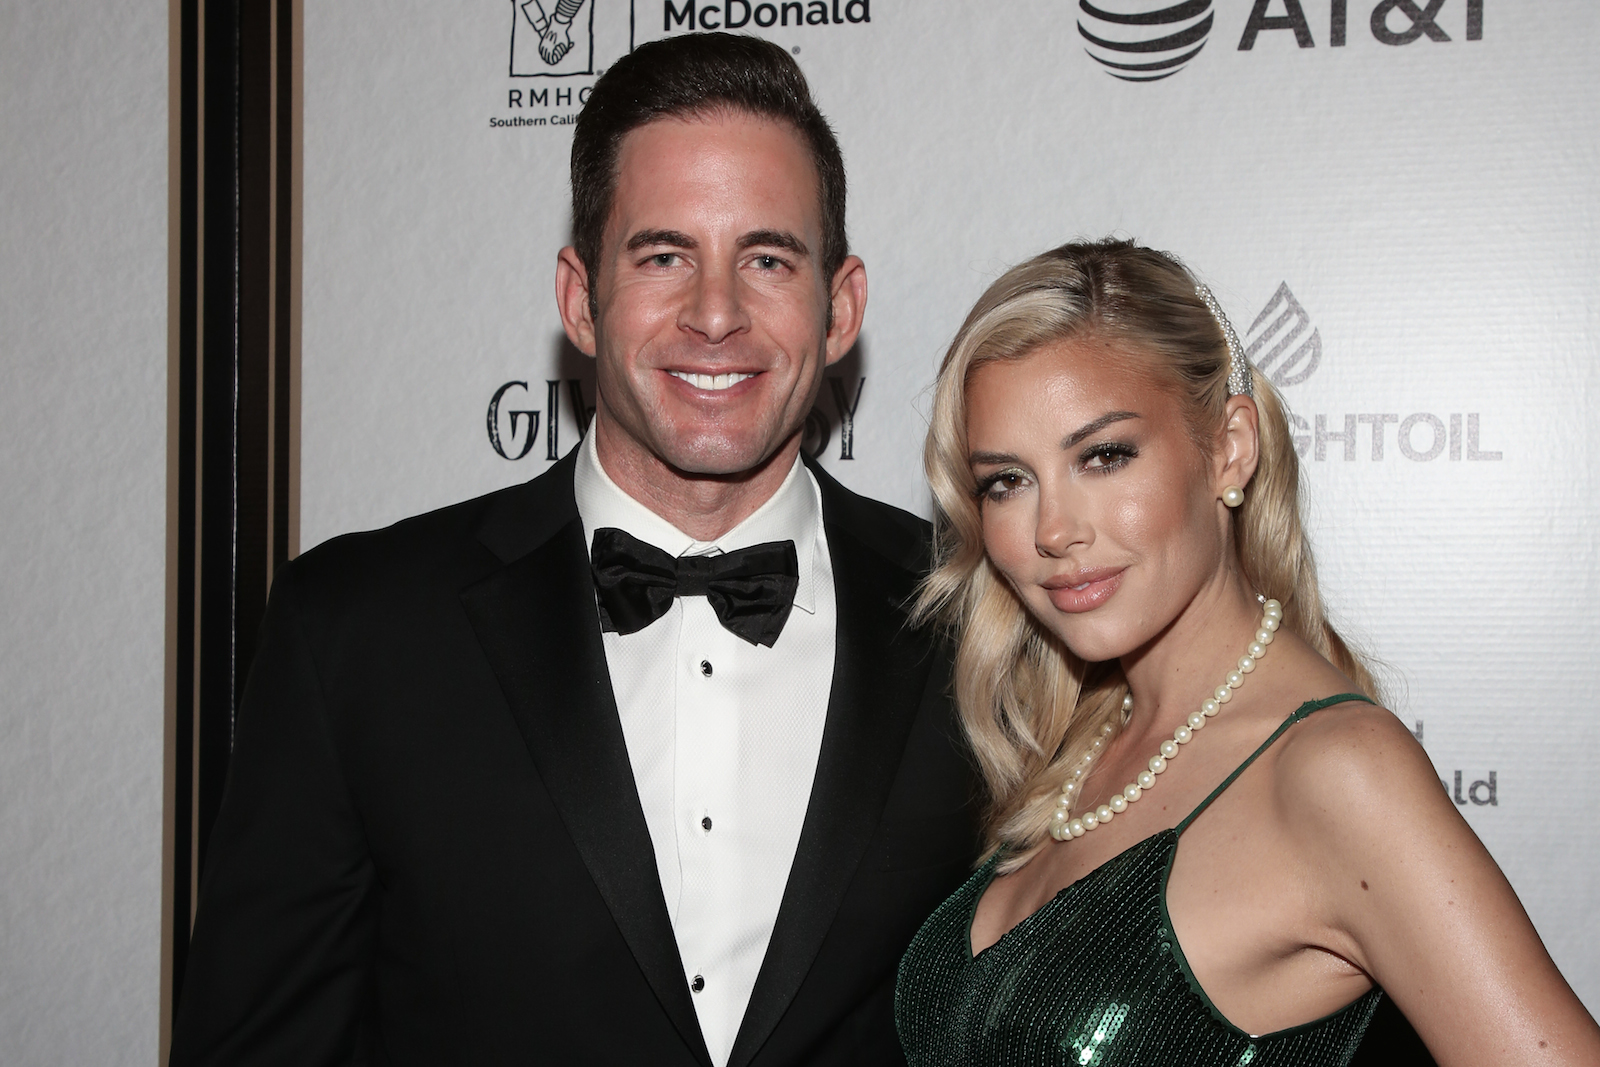 Tarek El Moussa from 'Flip or Flop' in a tuxedo and Heather Rae Young from 'Selling Sunset' in a green sequin dress standing together and smiling at an event. El Moussa and Young might both appear on 'Selling Sunset' Season 4